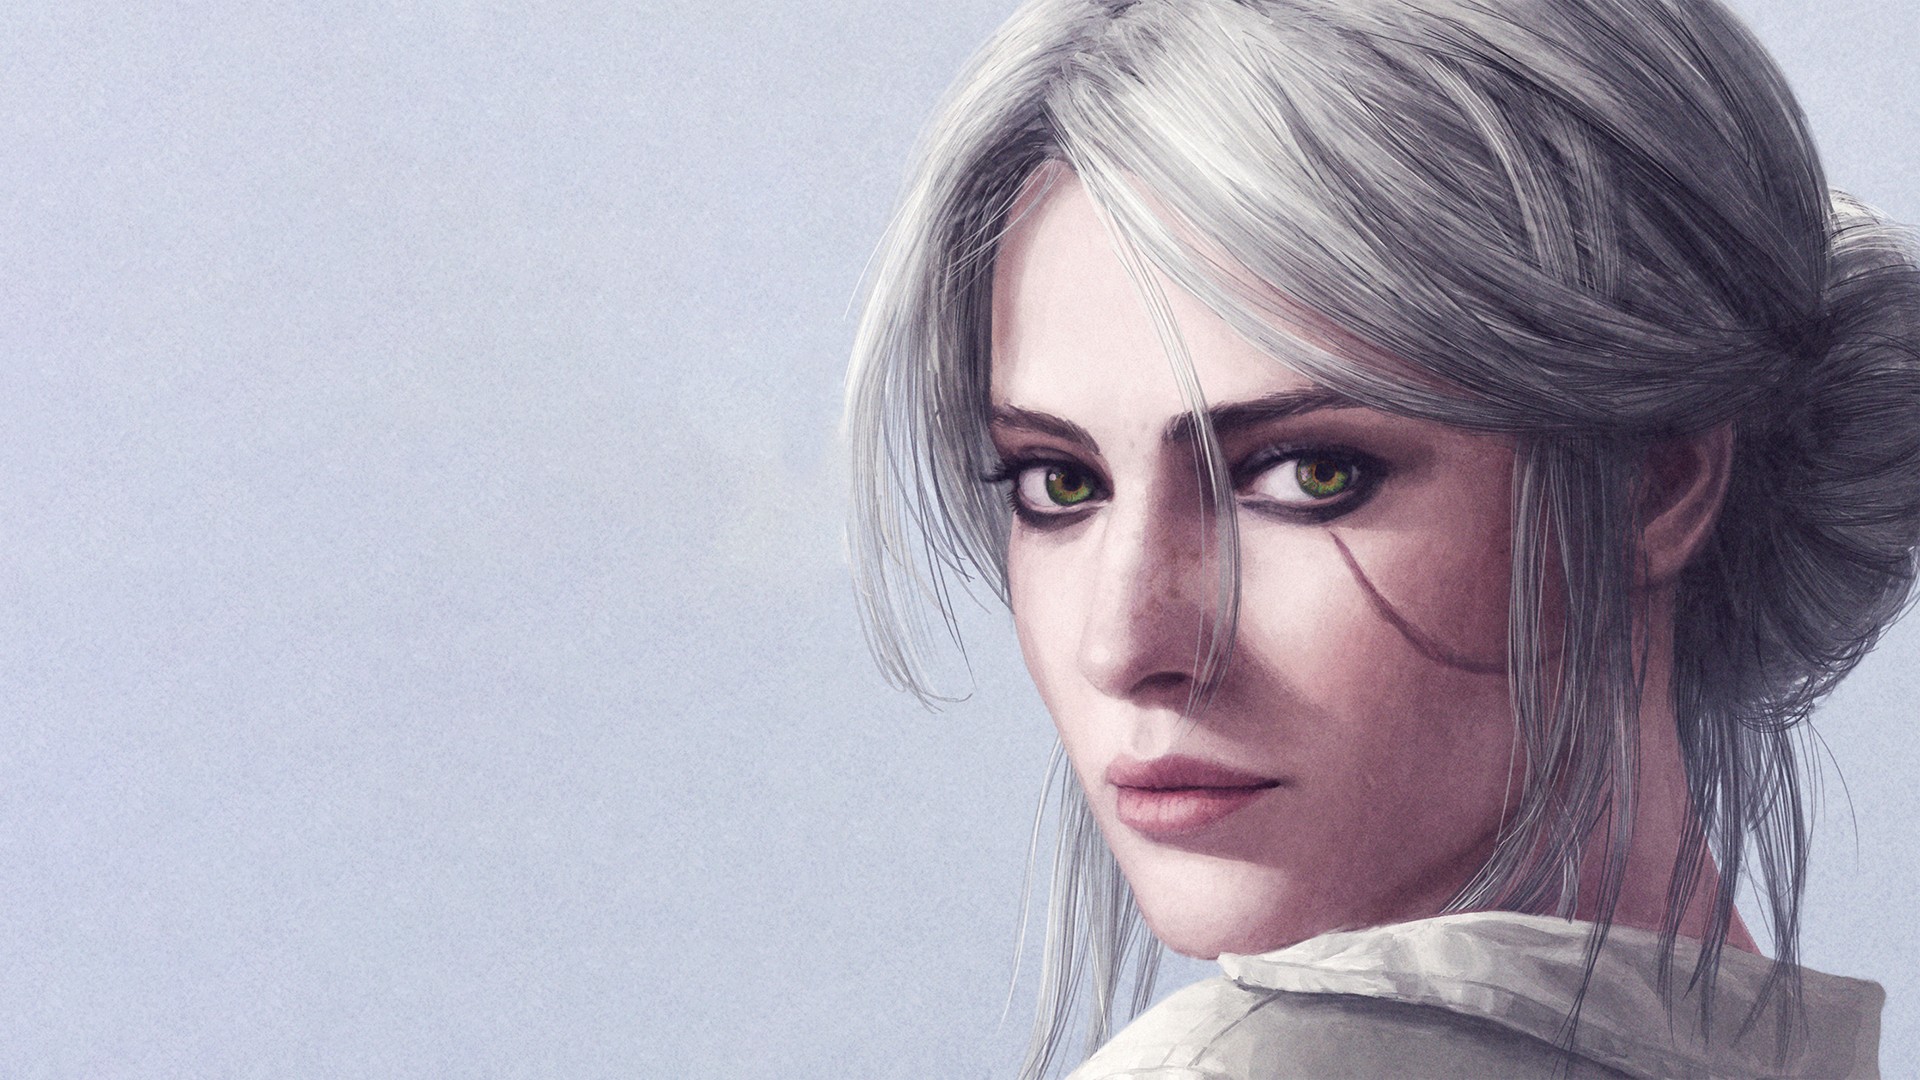 General 1920x1080 artwork Cirilla Fiona Elen Riannon The Witcher The Witcher 3: Wild Hunt video games Ástor Alexander women PC gaming face portrait video game girls video game characters looking at viewer gray background simple background green eyes gray hair hair in face